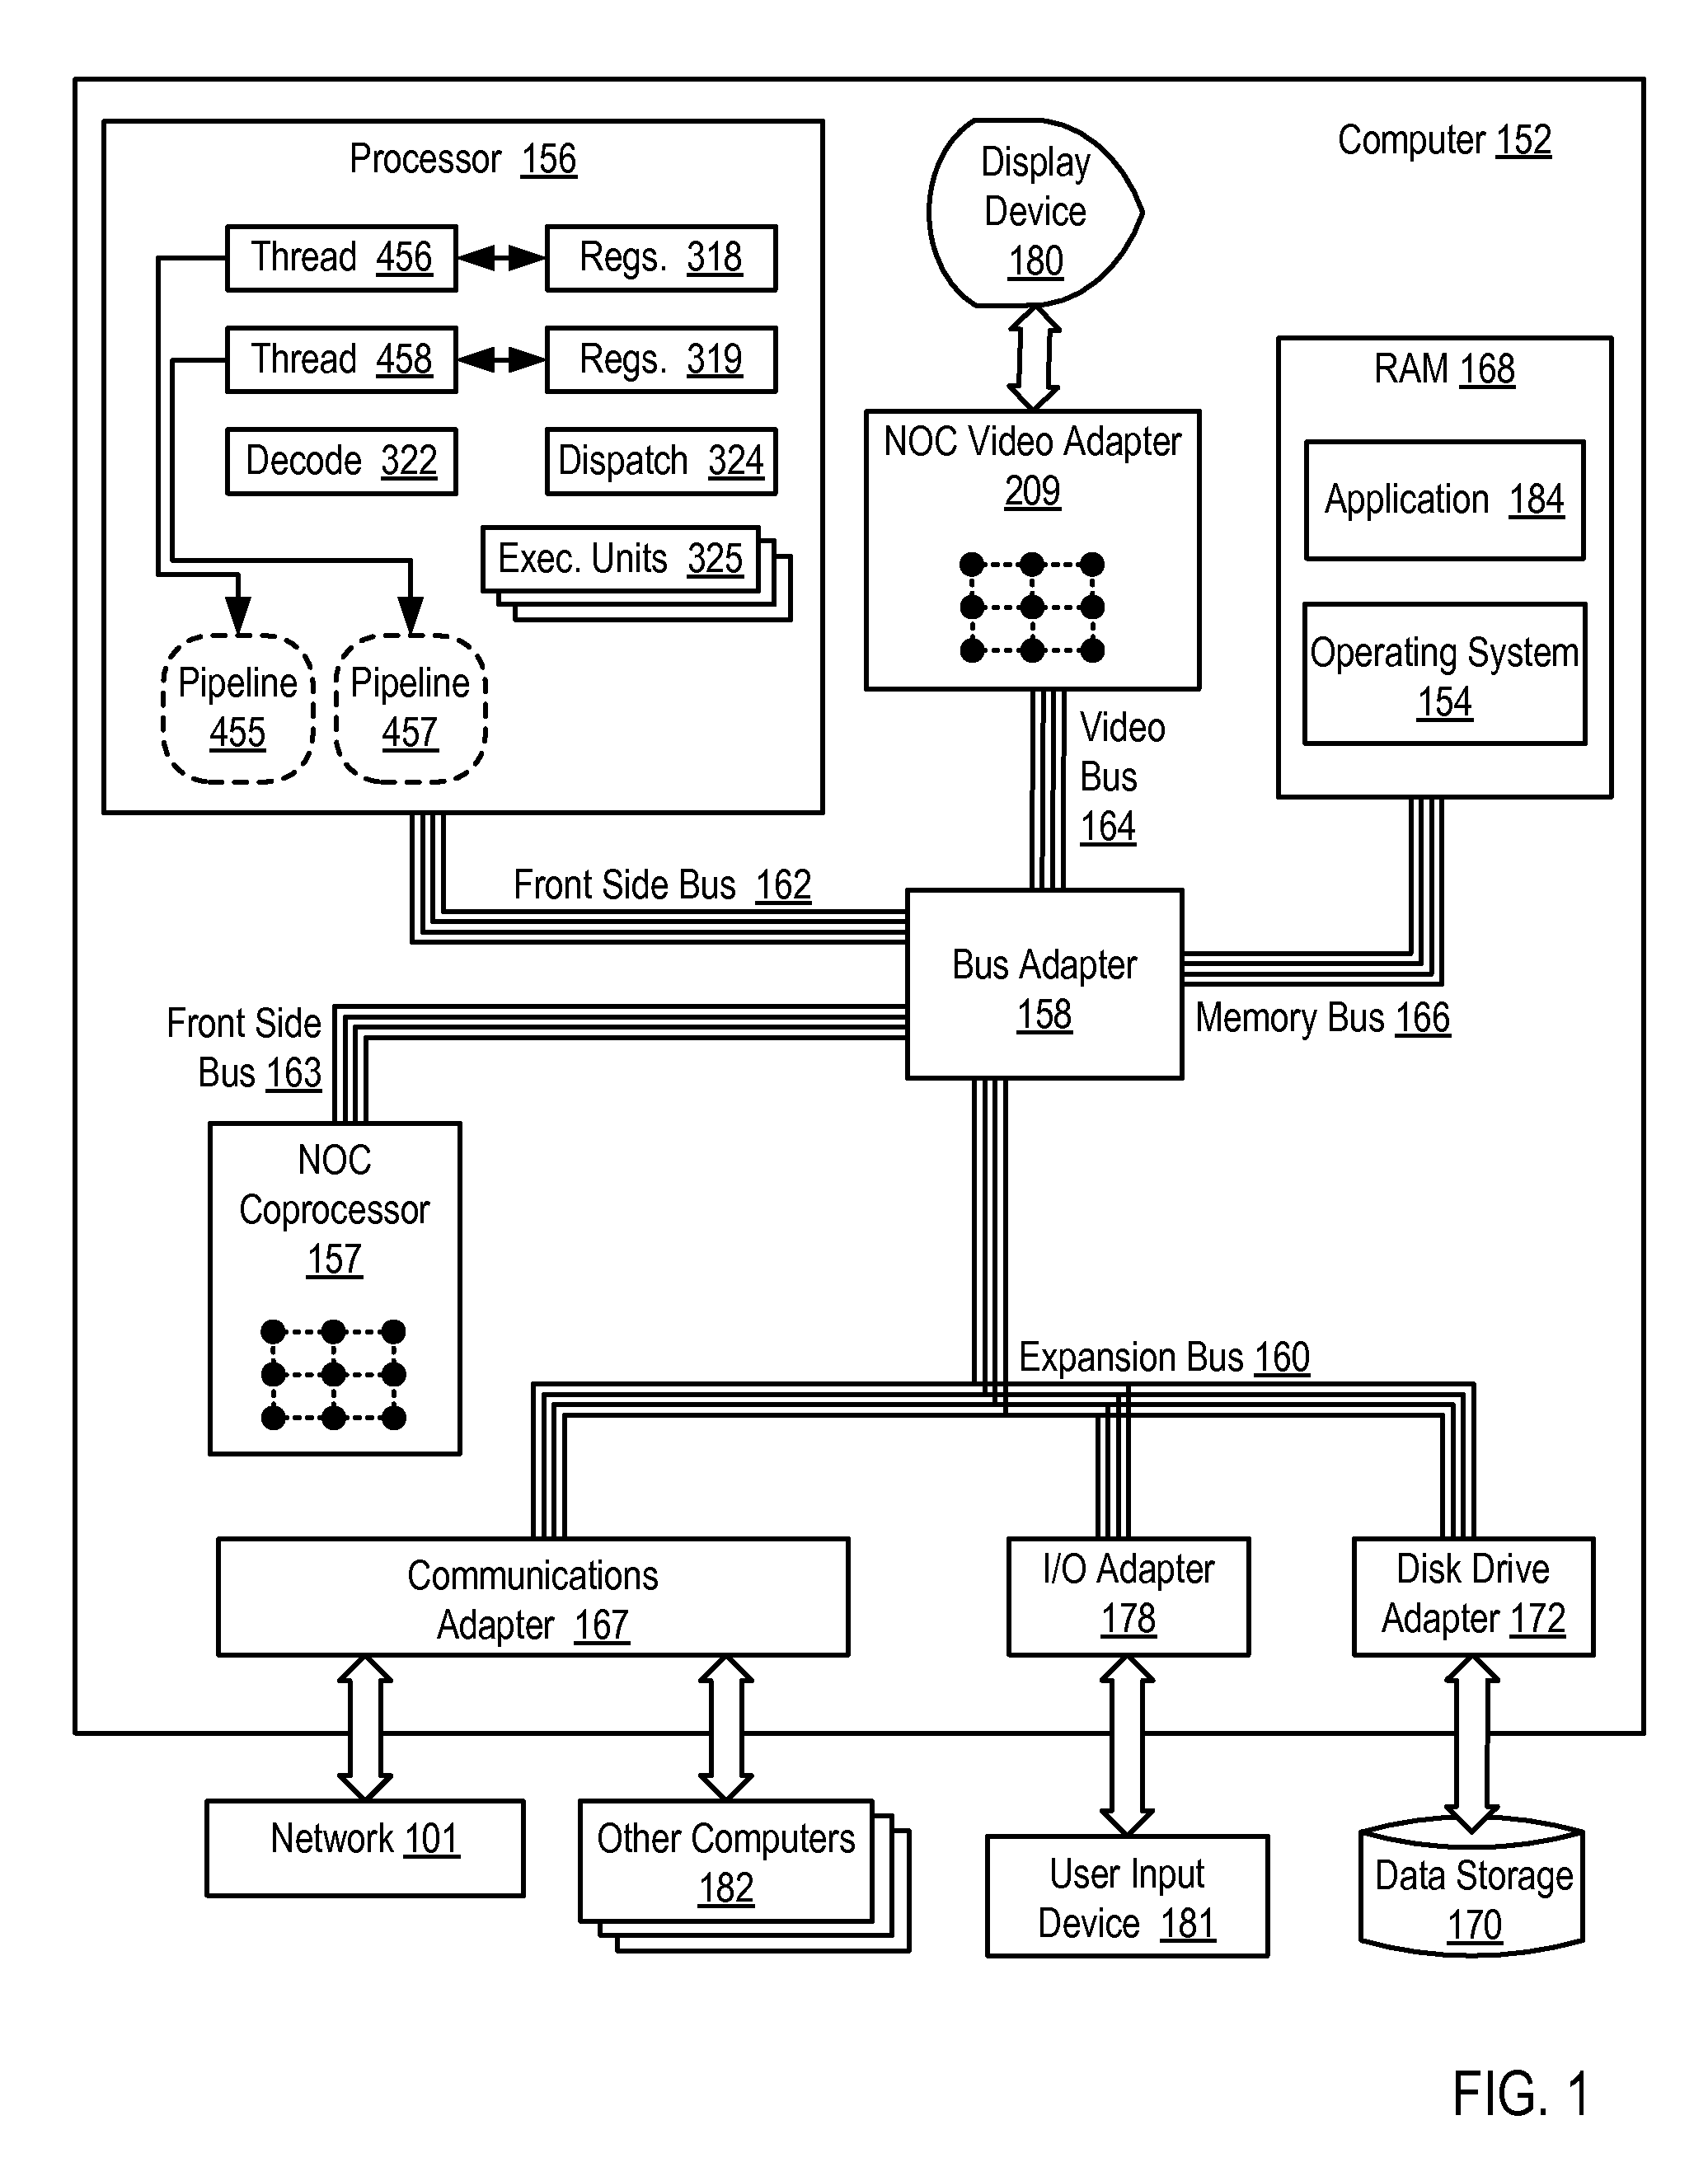 Computer Processors With Plural, Pipelined Hardware Threads Of Execution